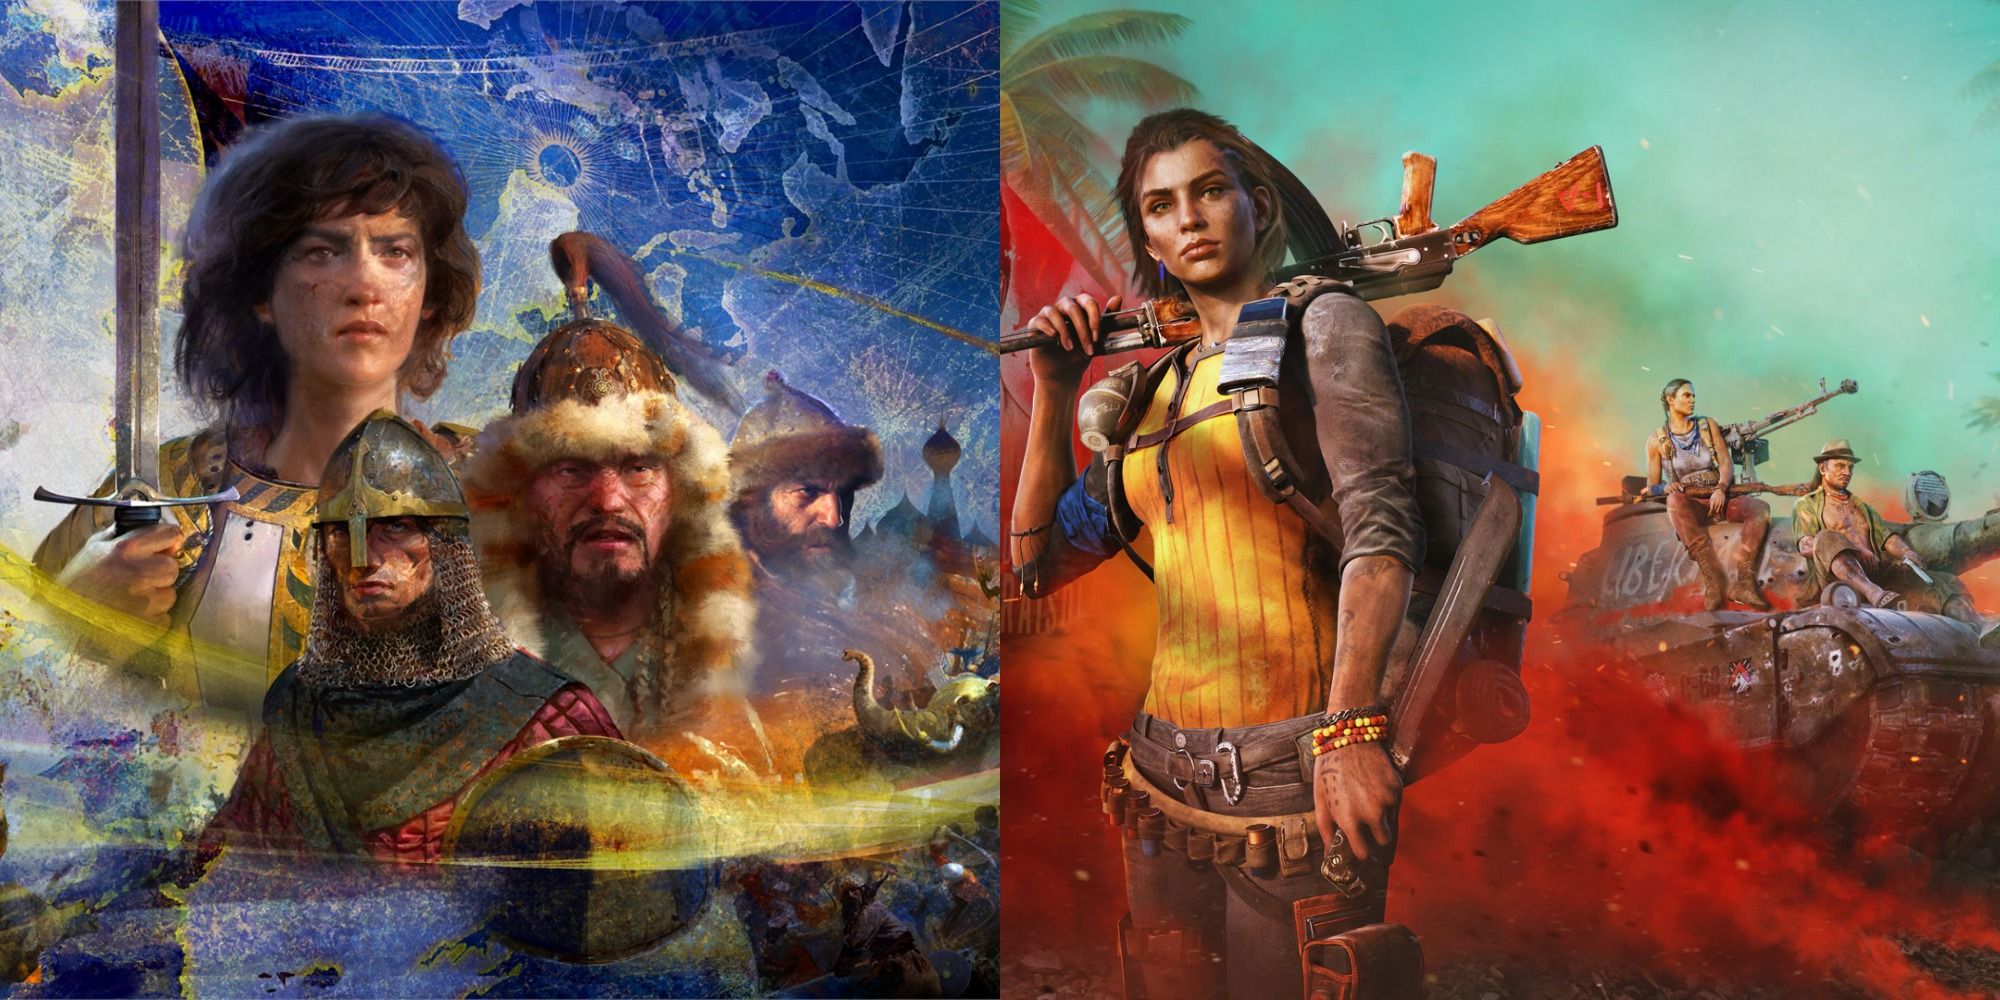 Split image showing characters for Age of Empires IV and Far Cry 6